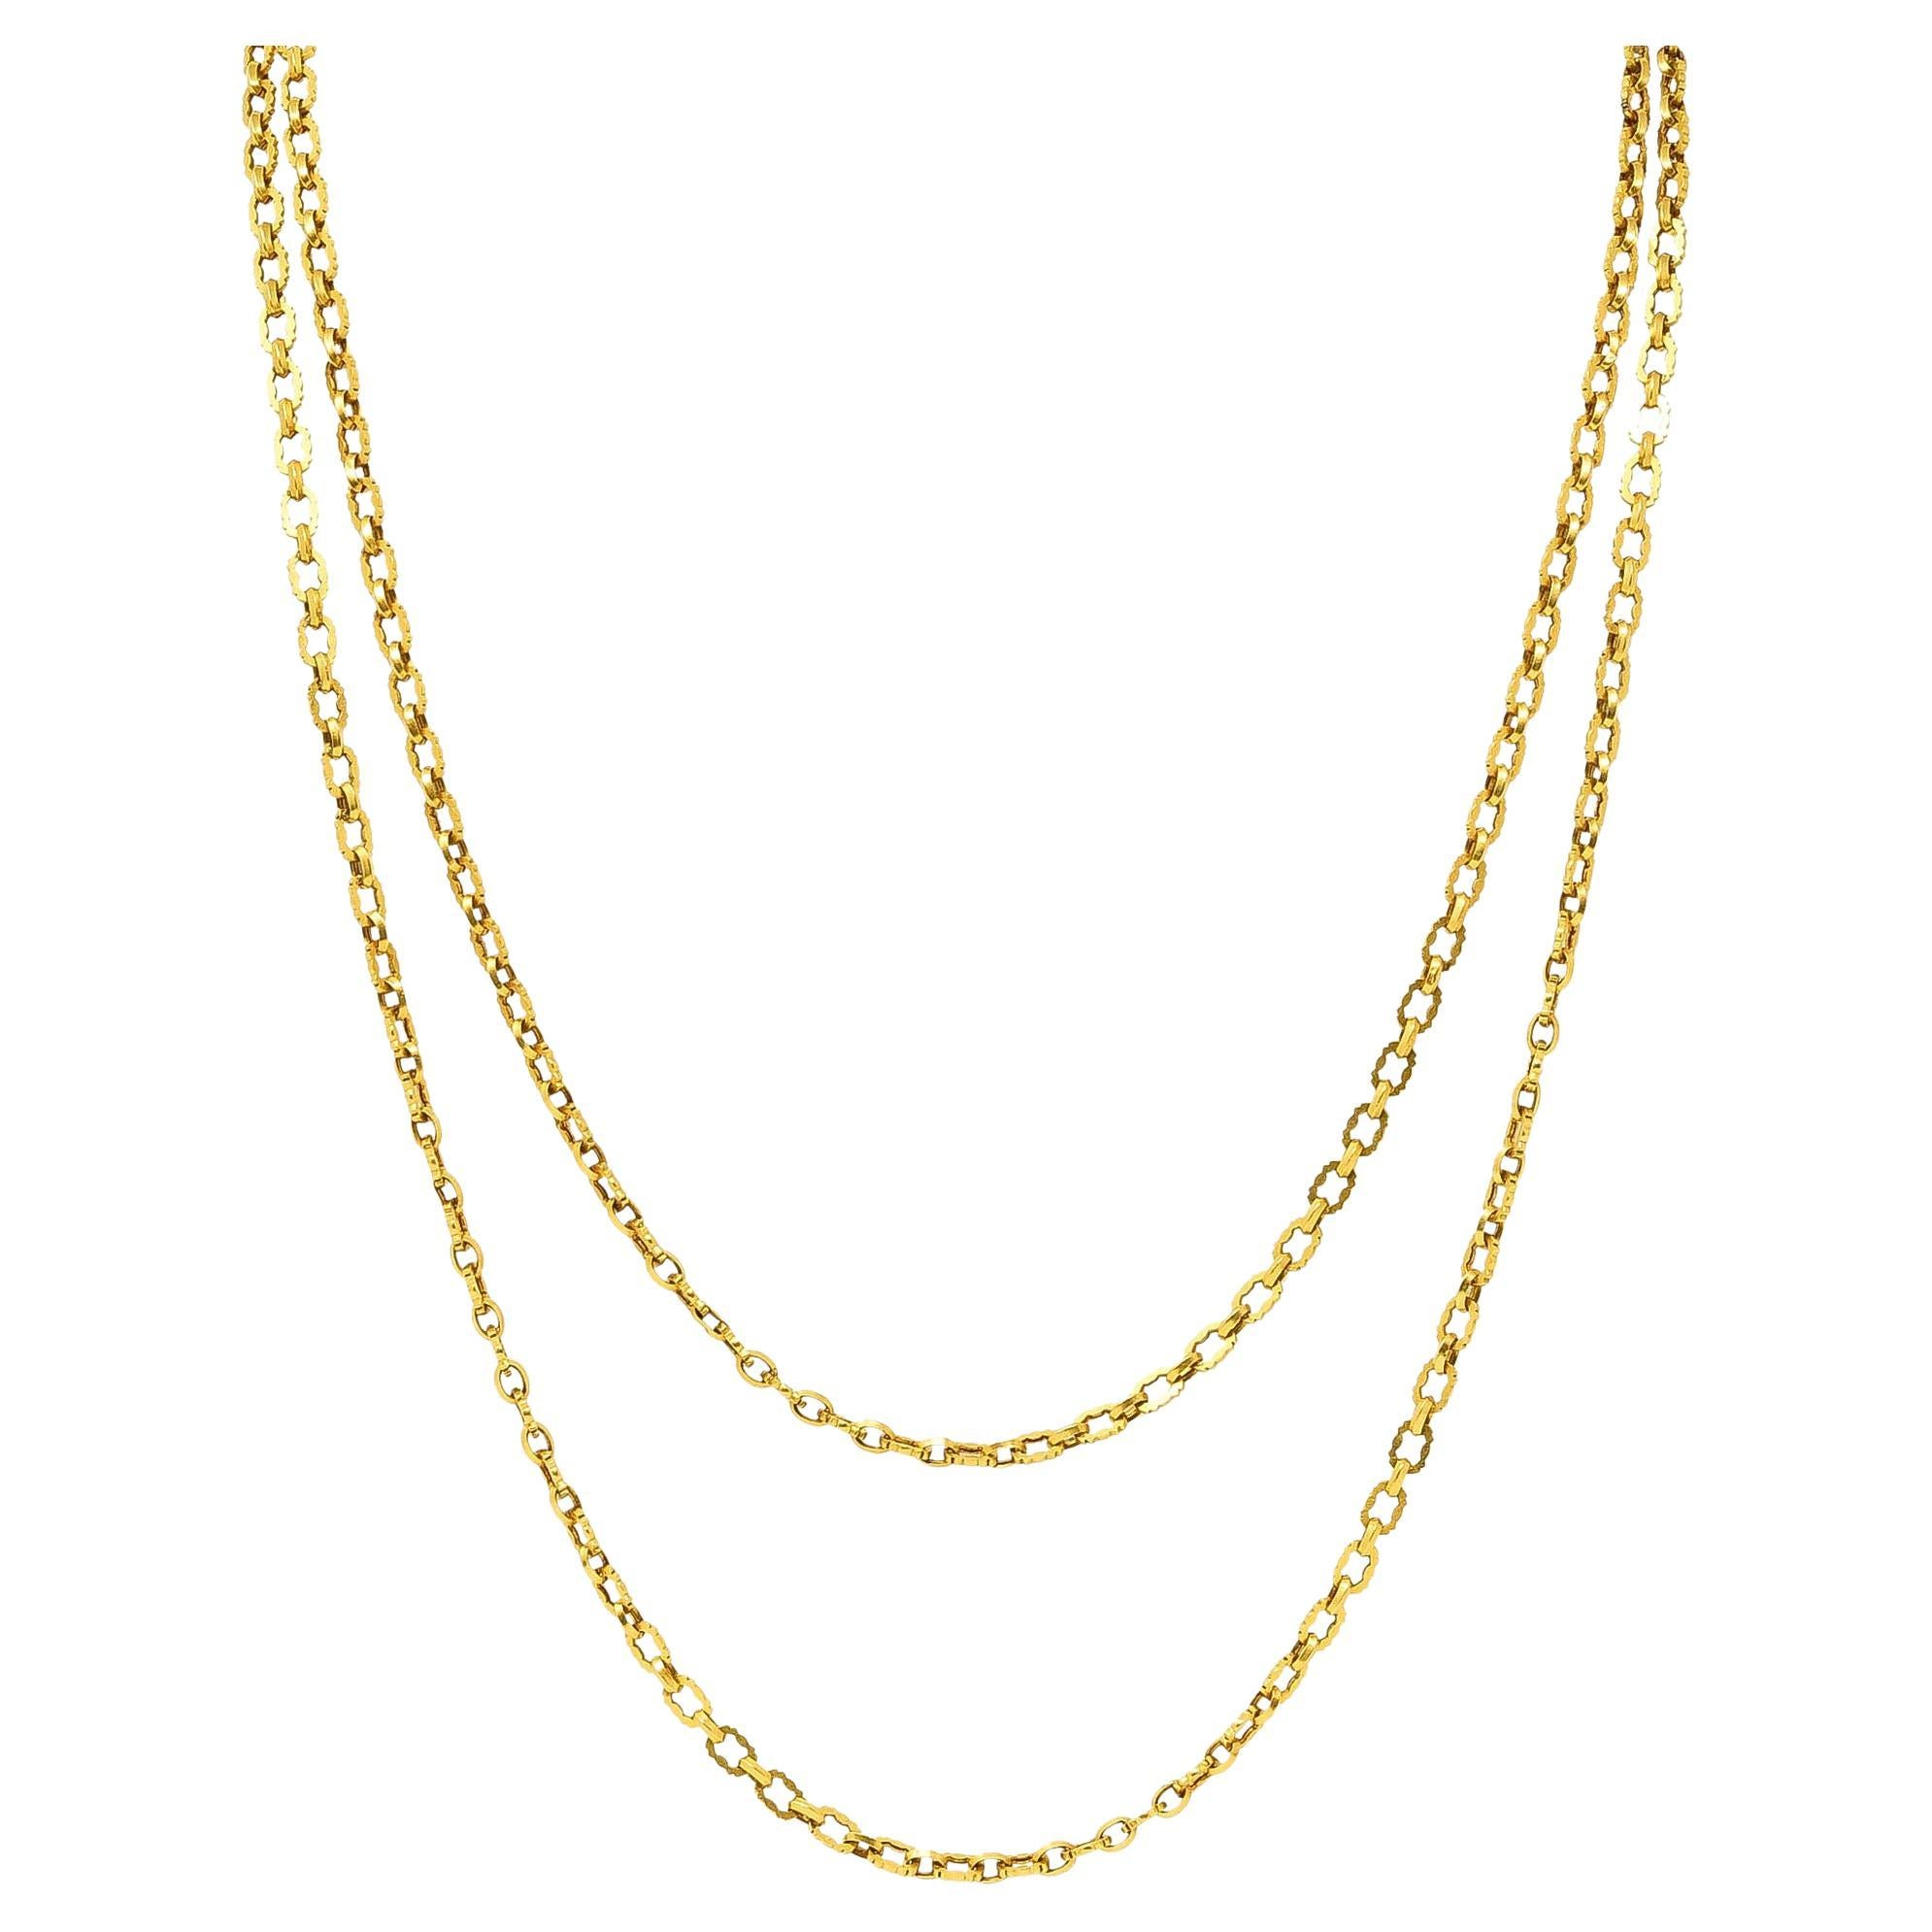 Victorian French 18 Karat Yellow Gold 58 Inch Long Chain Necklace